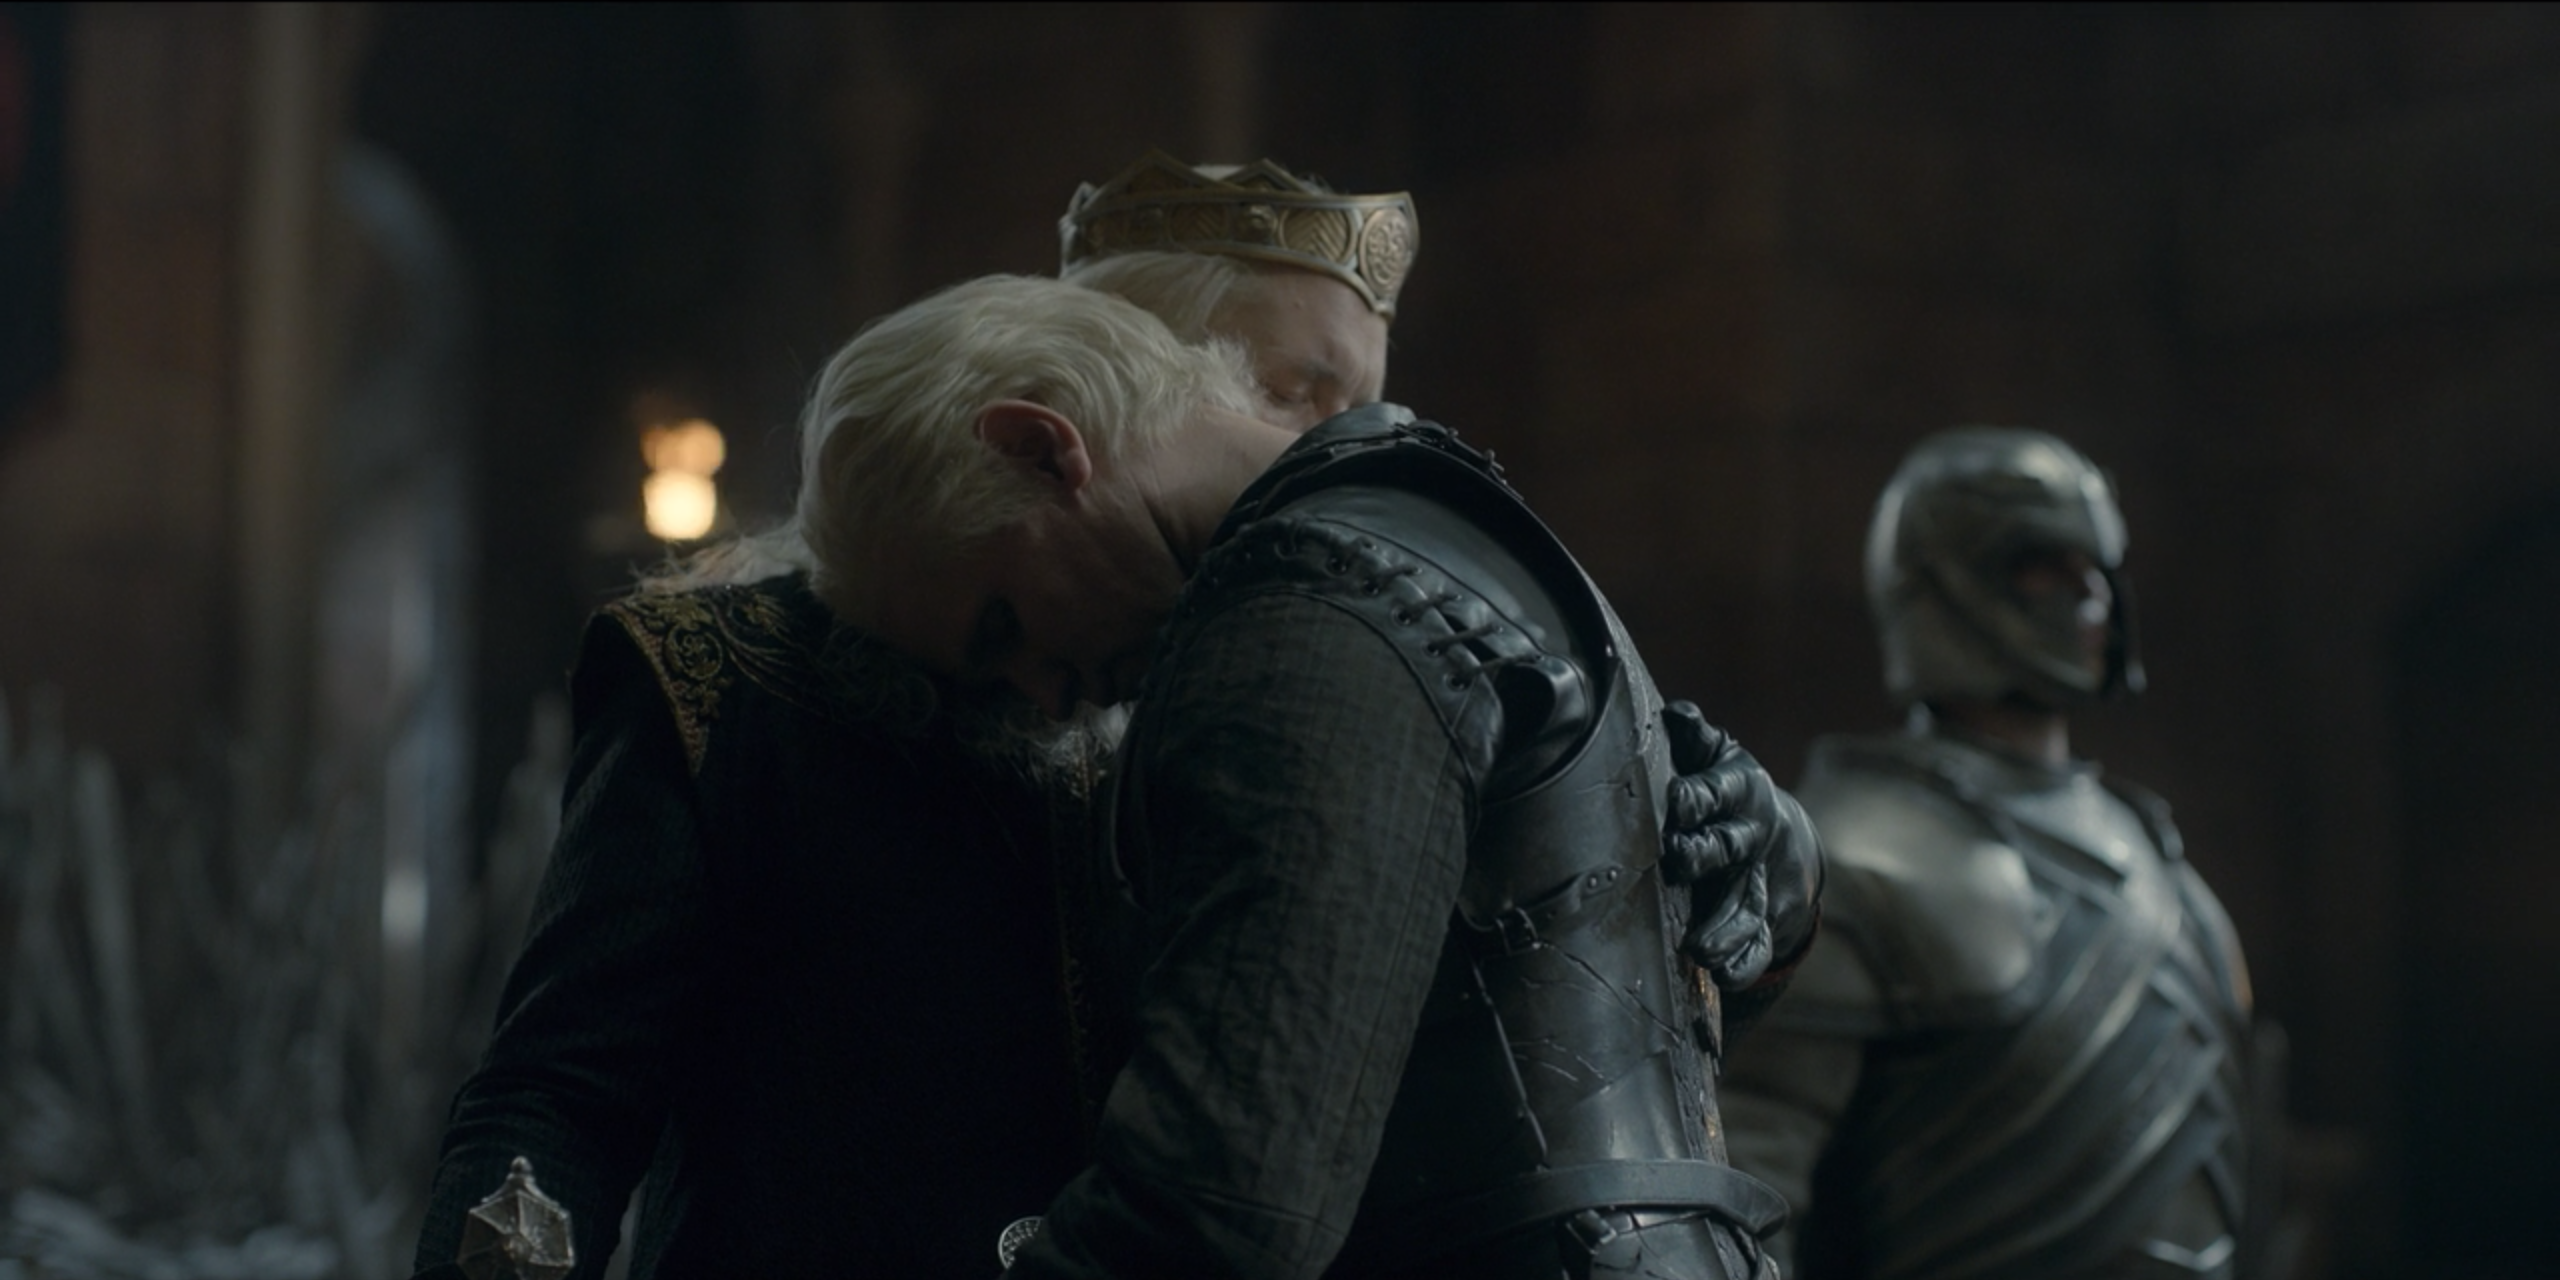 Viserys hugs Daemon, accepting him back at court on House of the Dragon